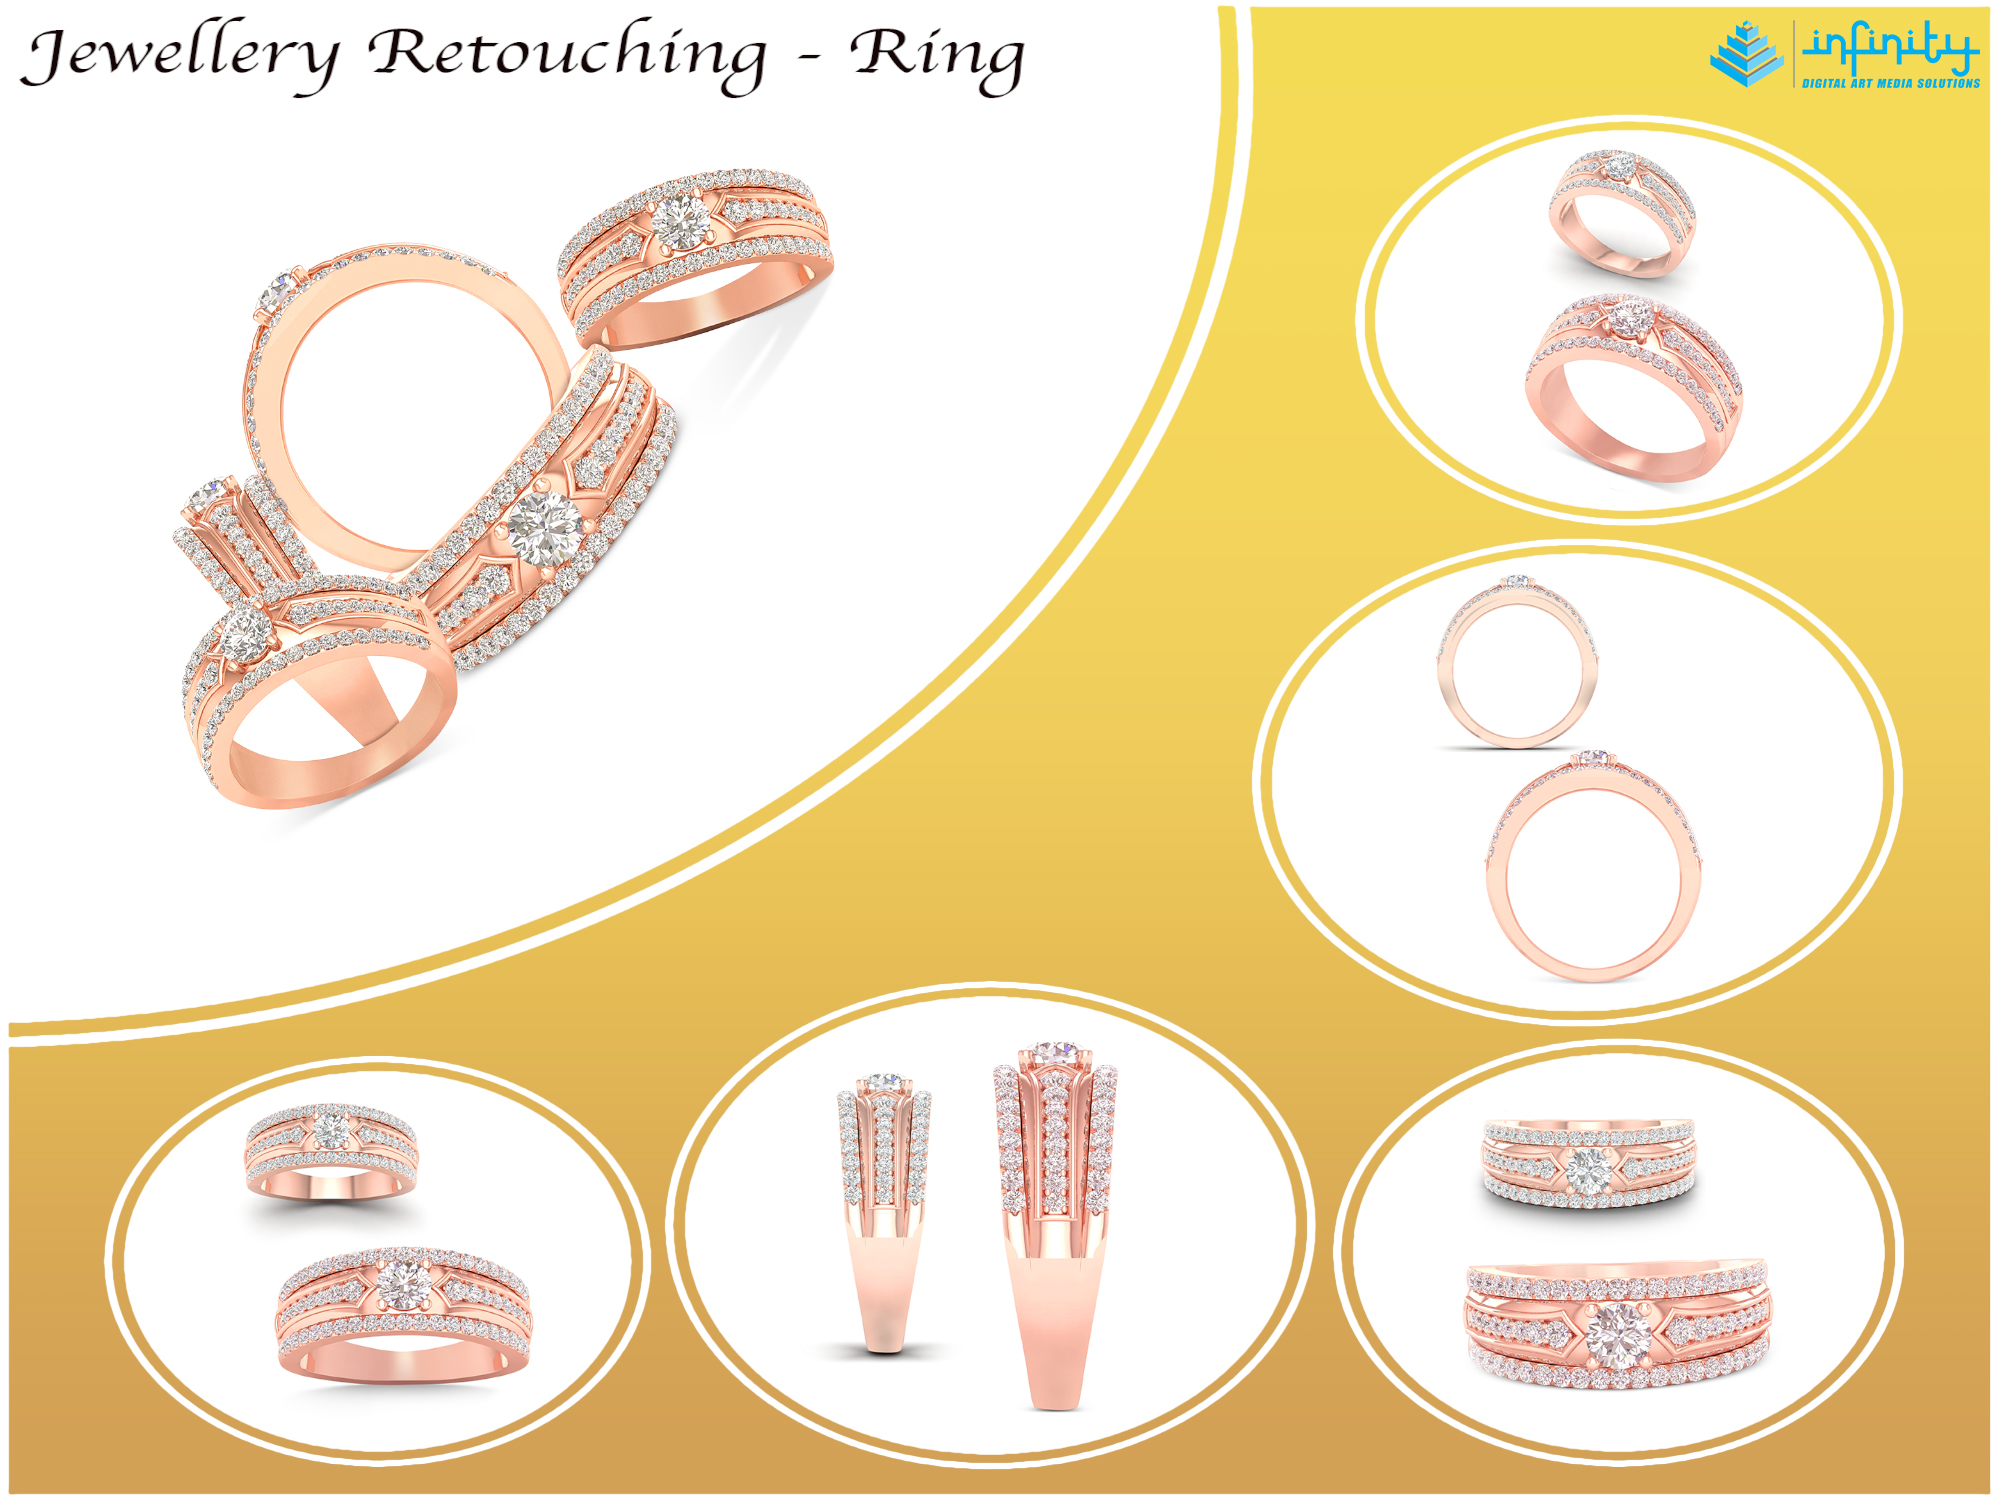 Ring jewellery retouch